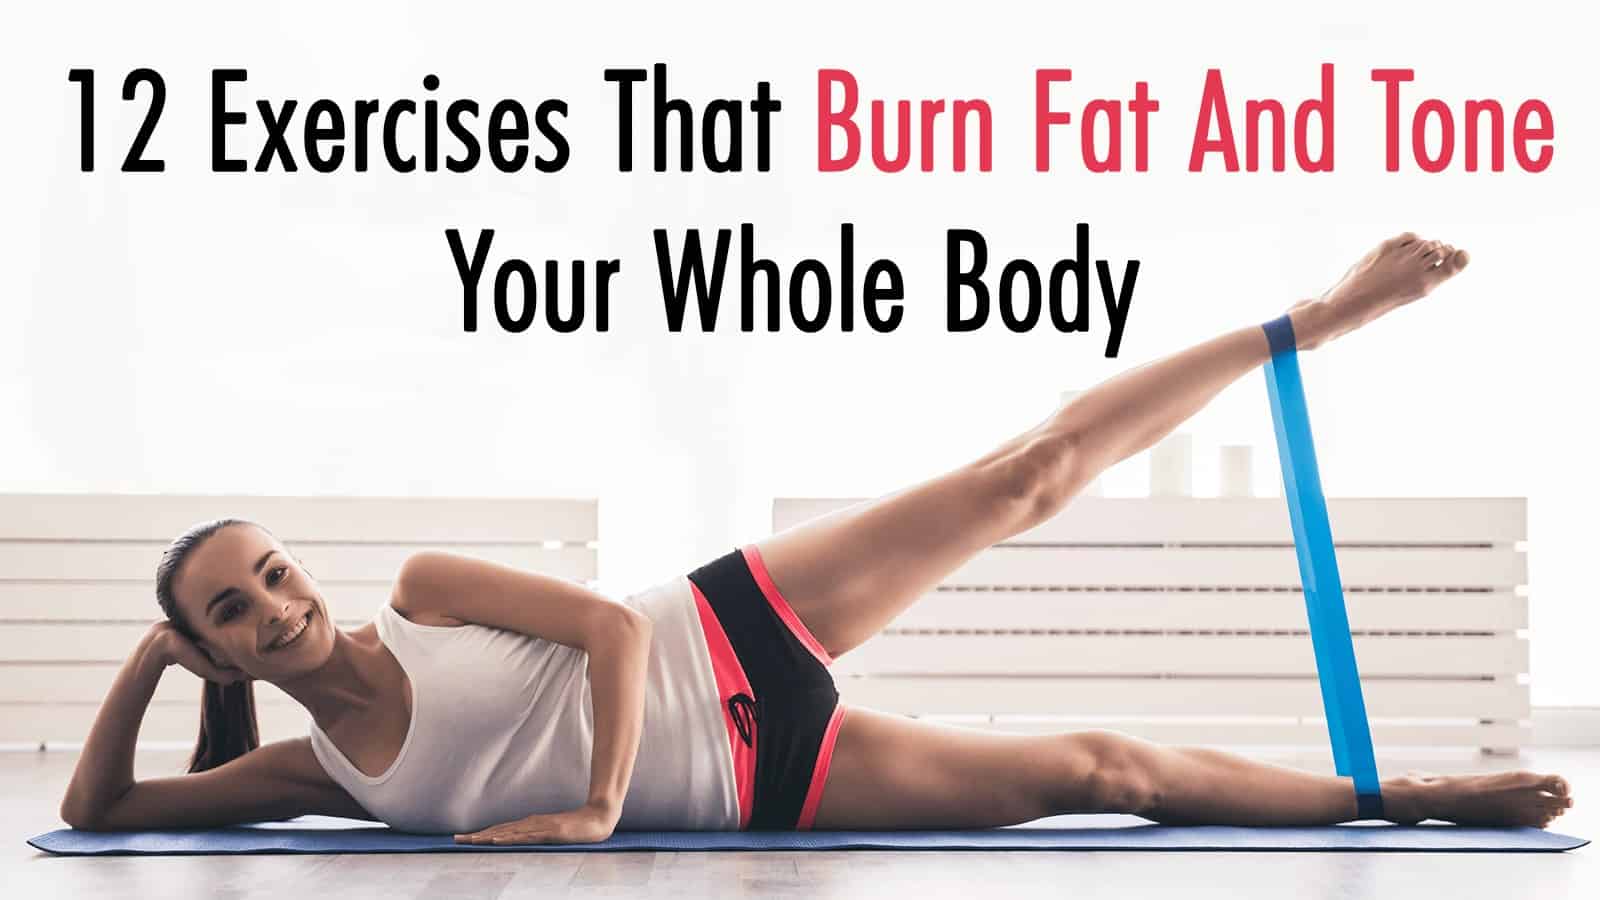 12 Exercises That Burn Fat And Tone Your Whole Body